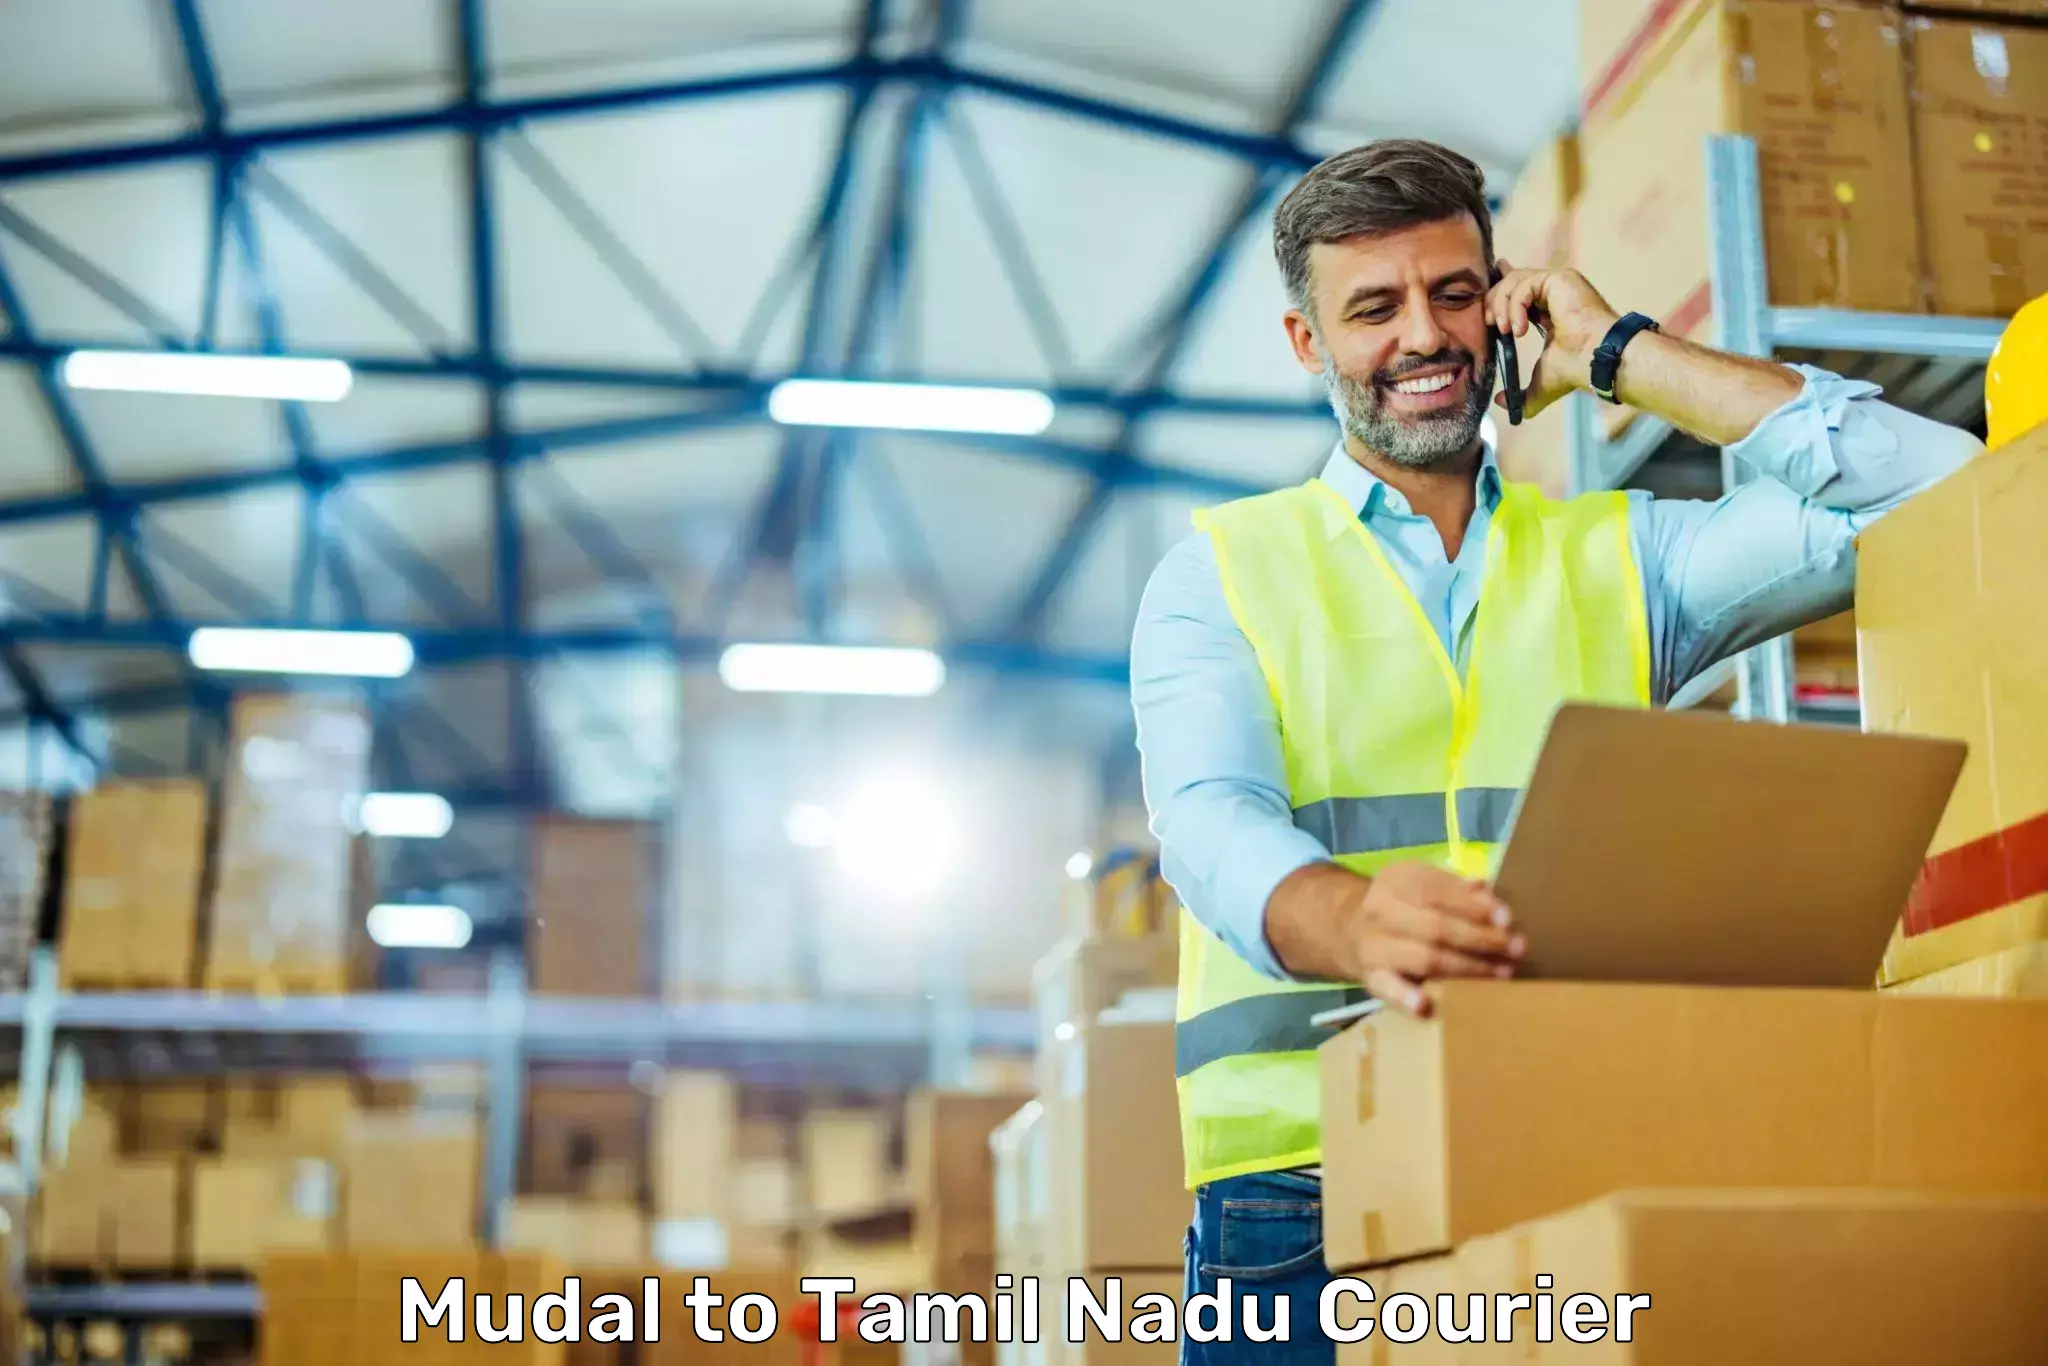 State-of-the-art courier technology Mudal to Tamil Nadu